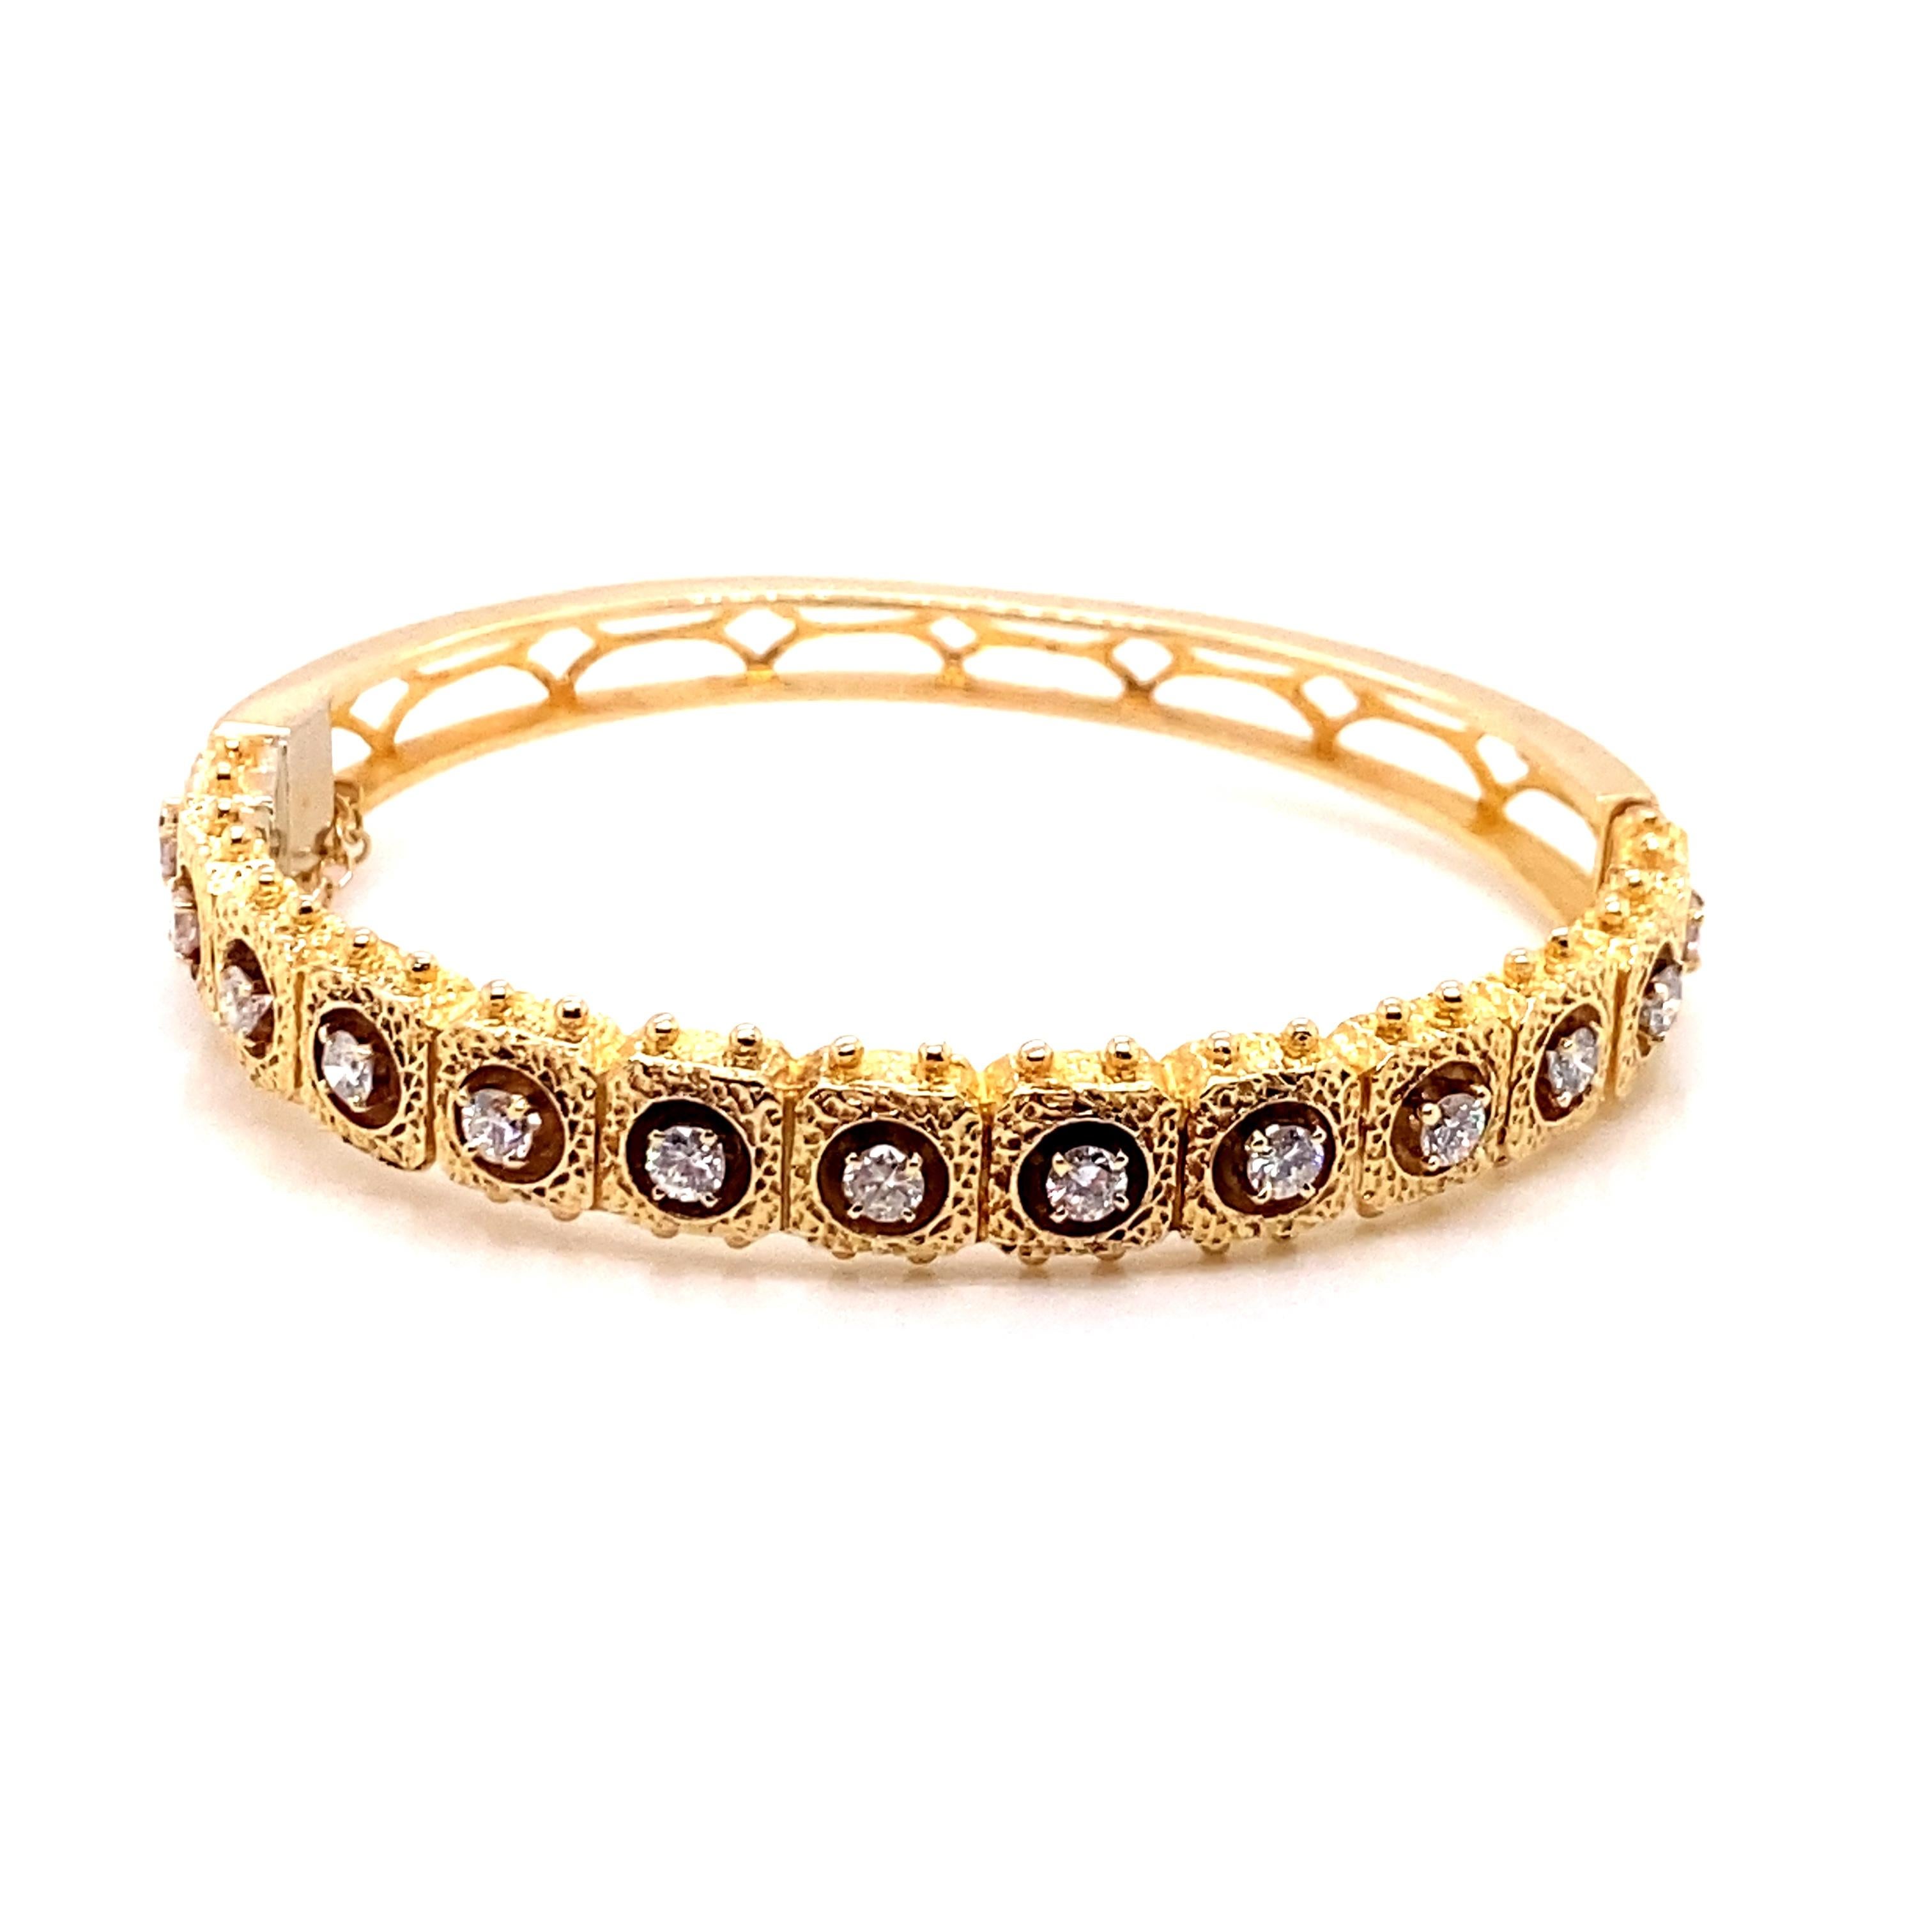 Vintage 1980's 14K Yellow Gold Diamond Bangle 1.05ct - The bracelets contains 13 round brilliant diamonds which are set in 4 prong heads with an approximate weight of 1.05ct. The diamond quality is G - H color SI clarity. The width of the bangle is